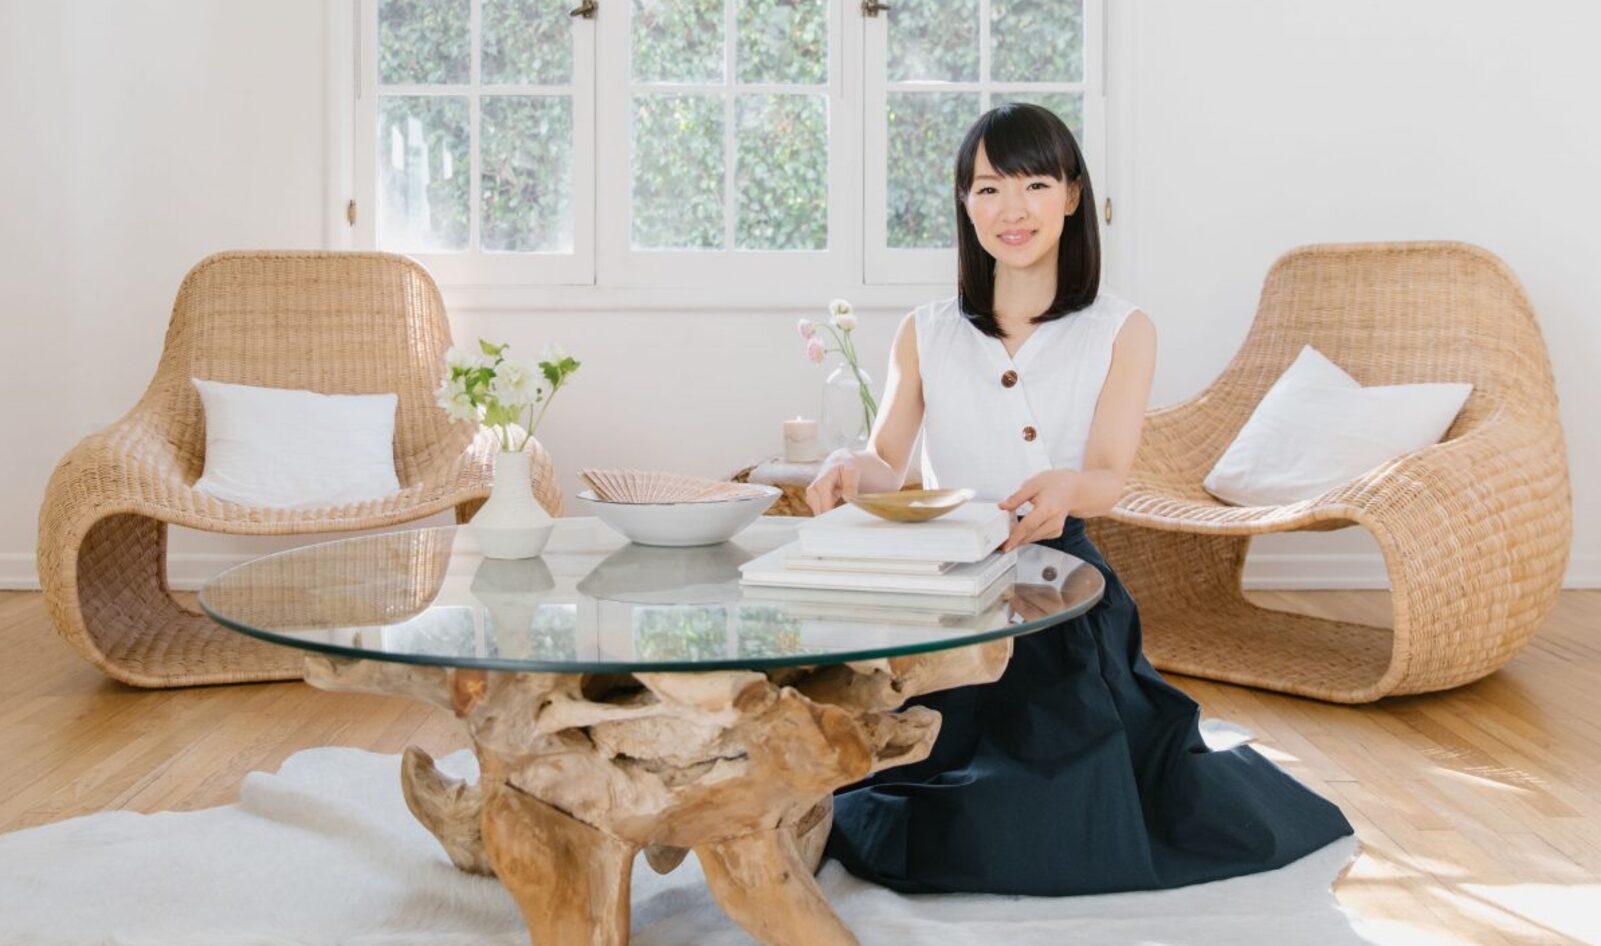 &nbsp;5 Vegan Ways to Tidy Up Your Life That Would Make Marie Kondo Proud&nbsp;